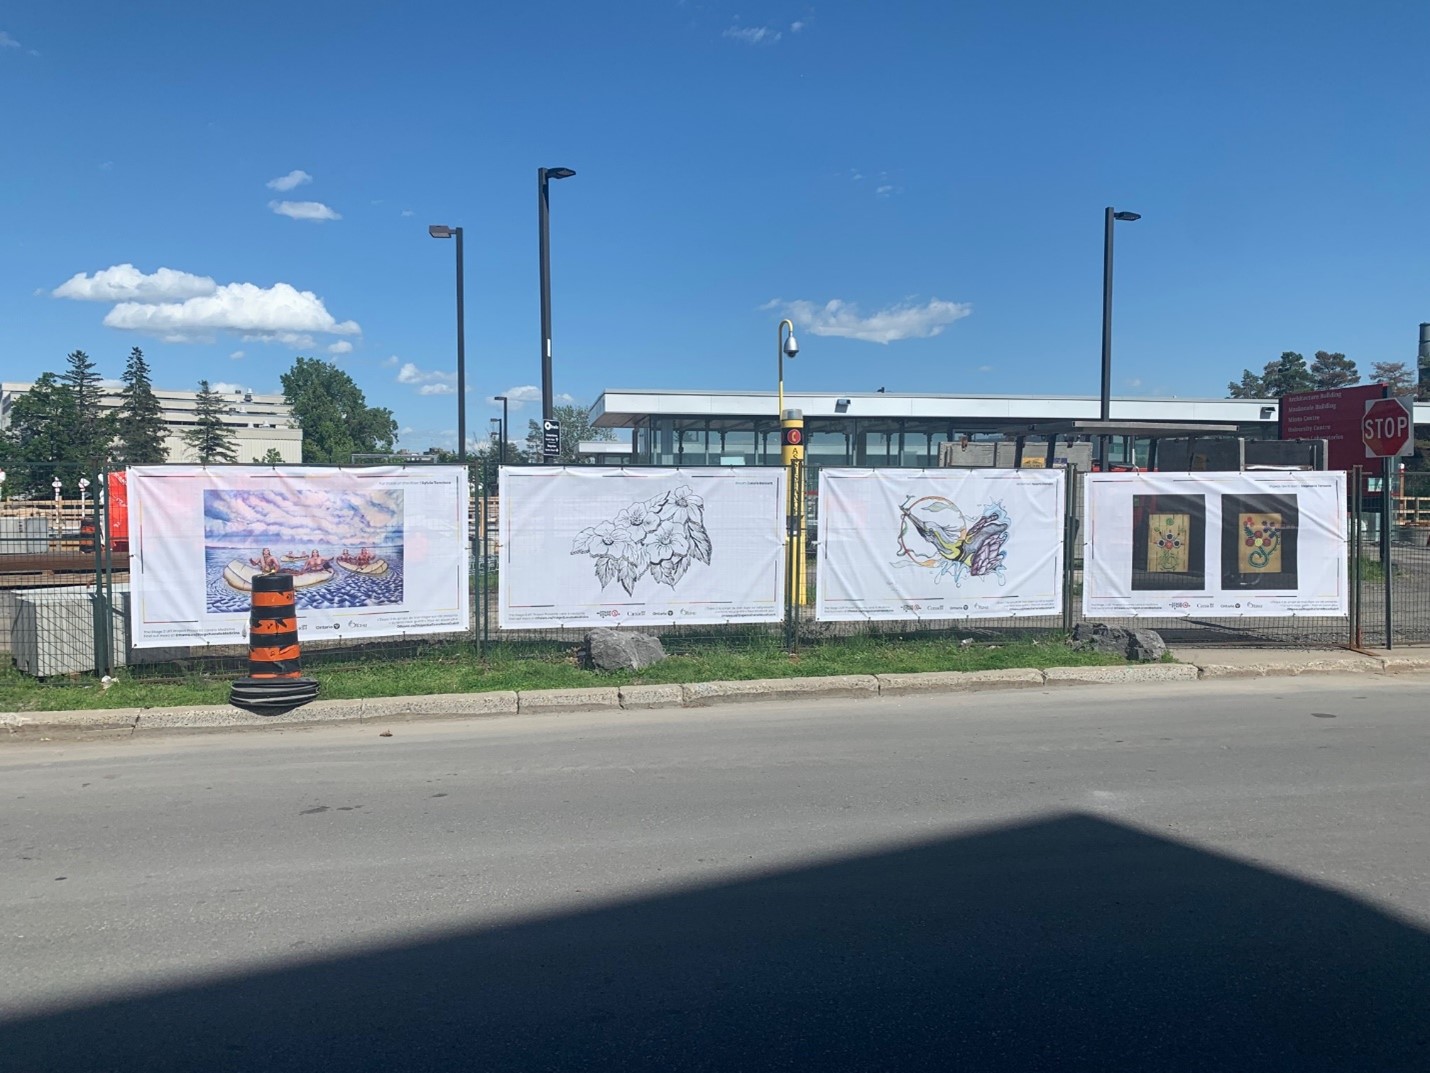 Artwork hanging on construction fencing in front of a public pathway